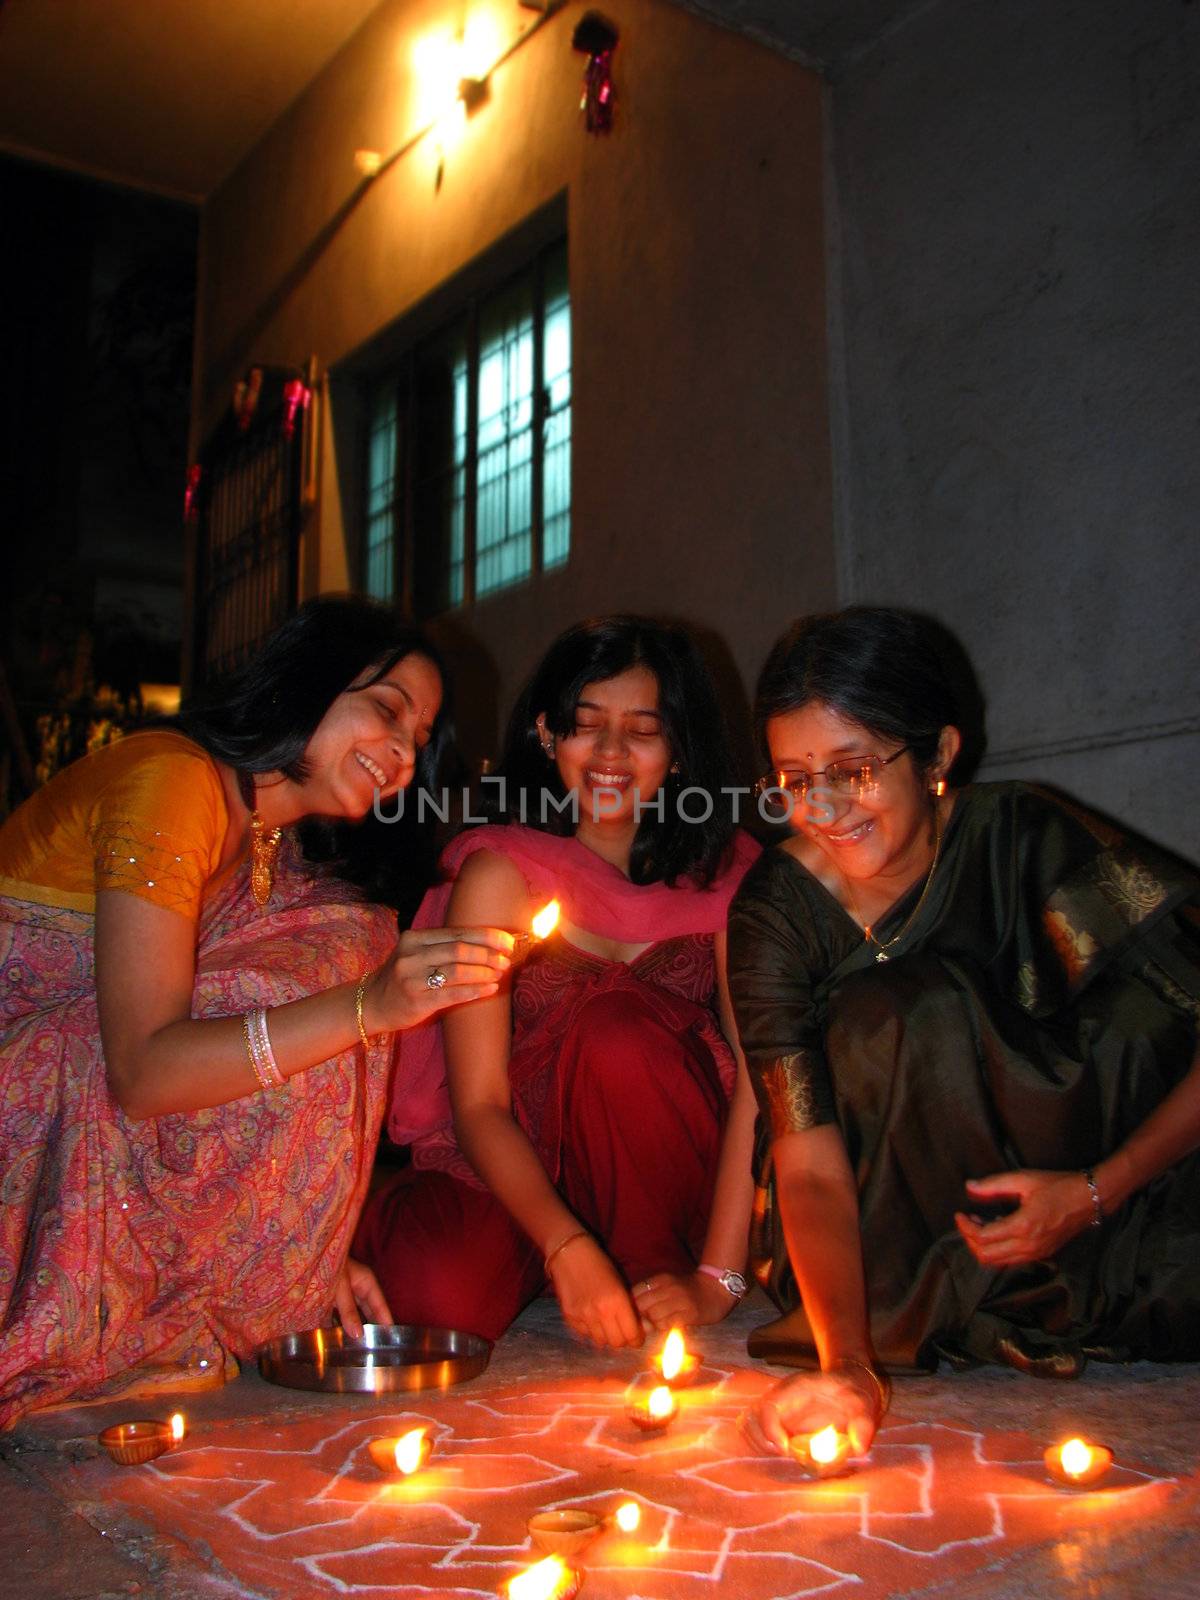 Indian women from a hindu family in traditional attire arranging lamps as per culture, on the occassion of Diwali festival in India.